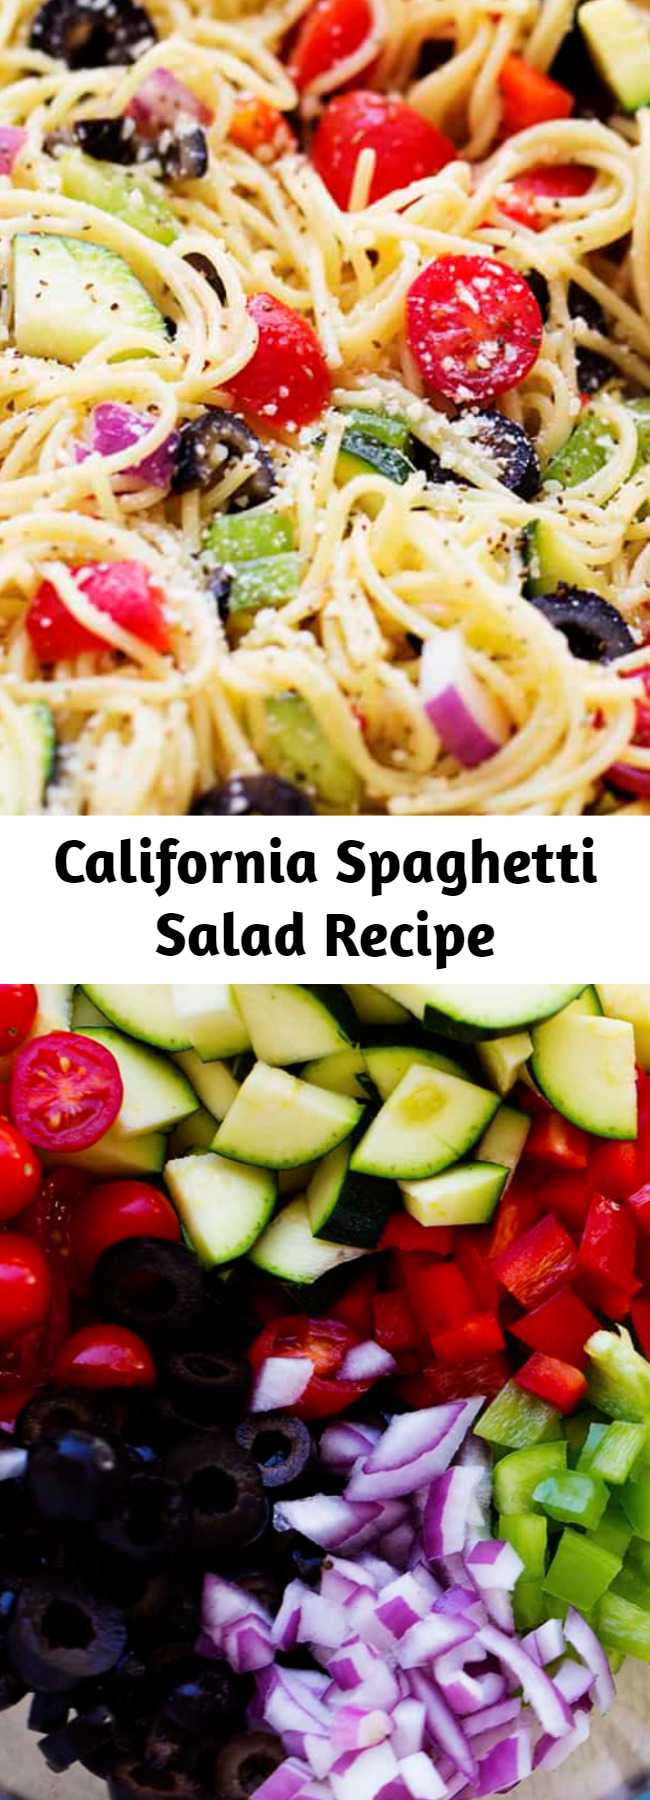 California Spaghetti Salad Recipe - A delicious spaghetti salad filled with fresh summer veggies and olives. Topped with a zesty italian dressing and parmesan cheese, this will be the hit of your next gathering!